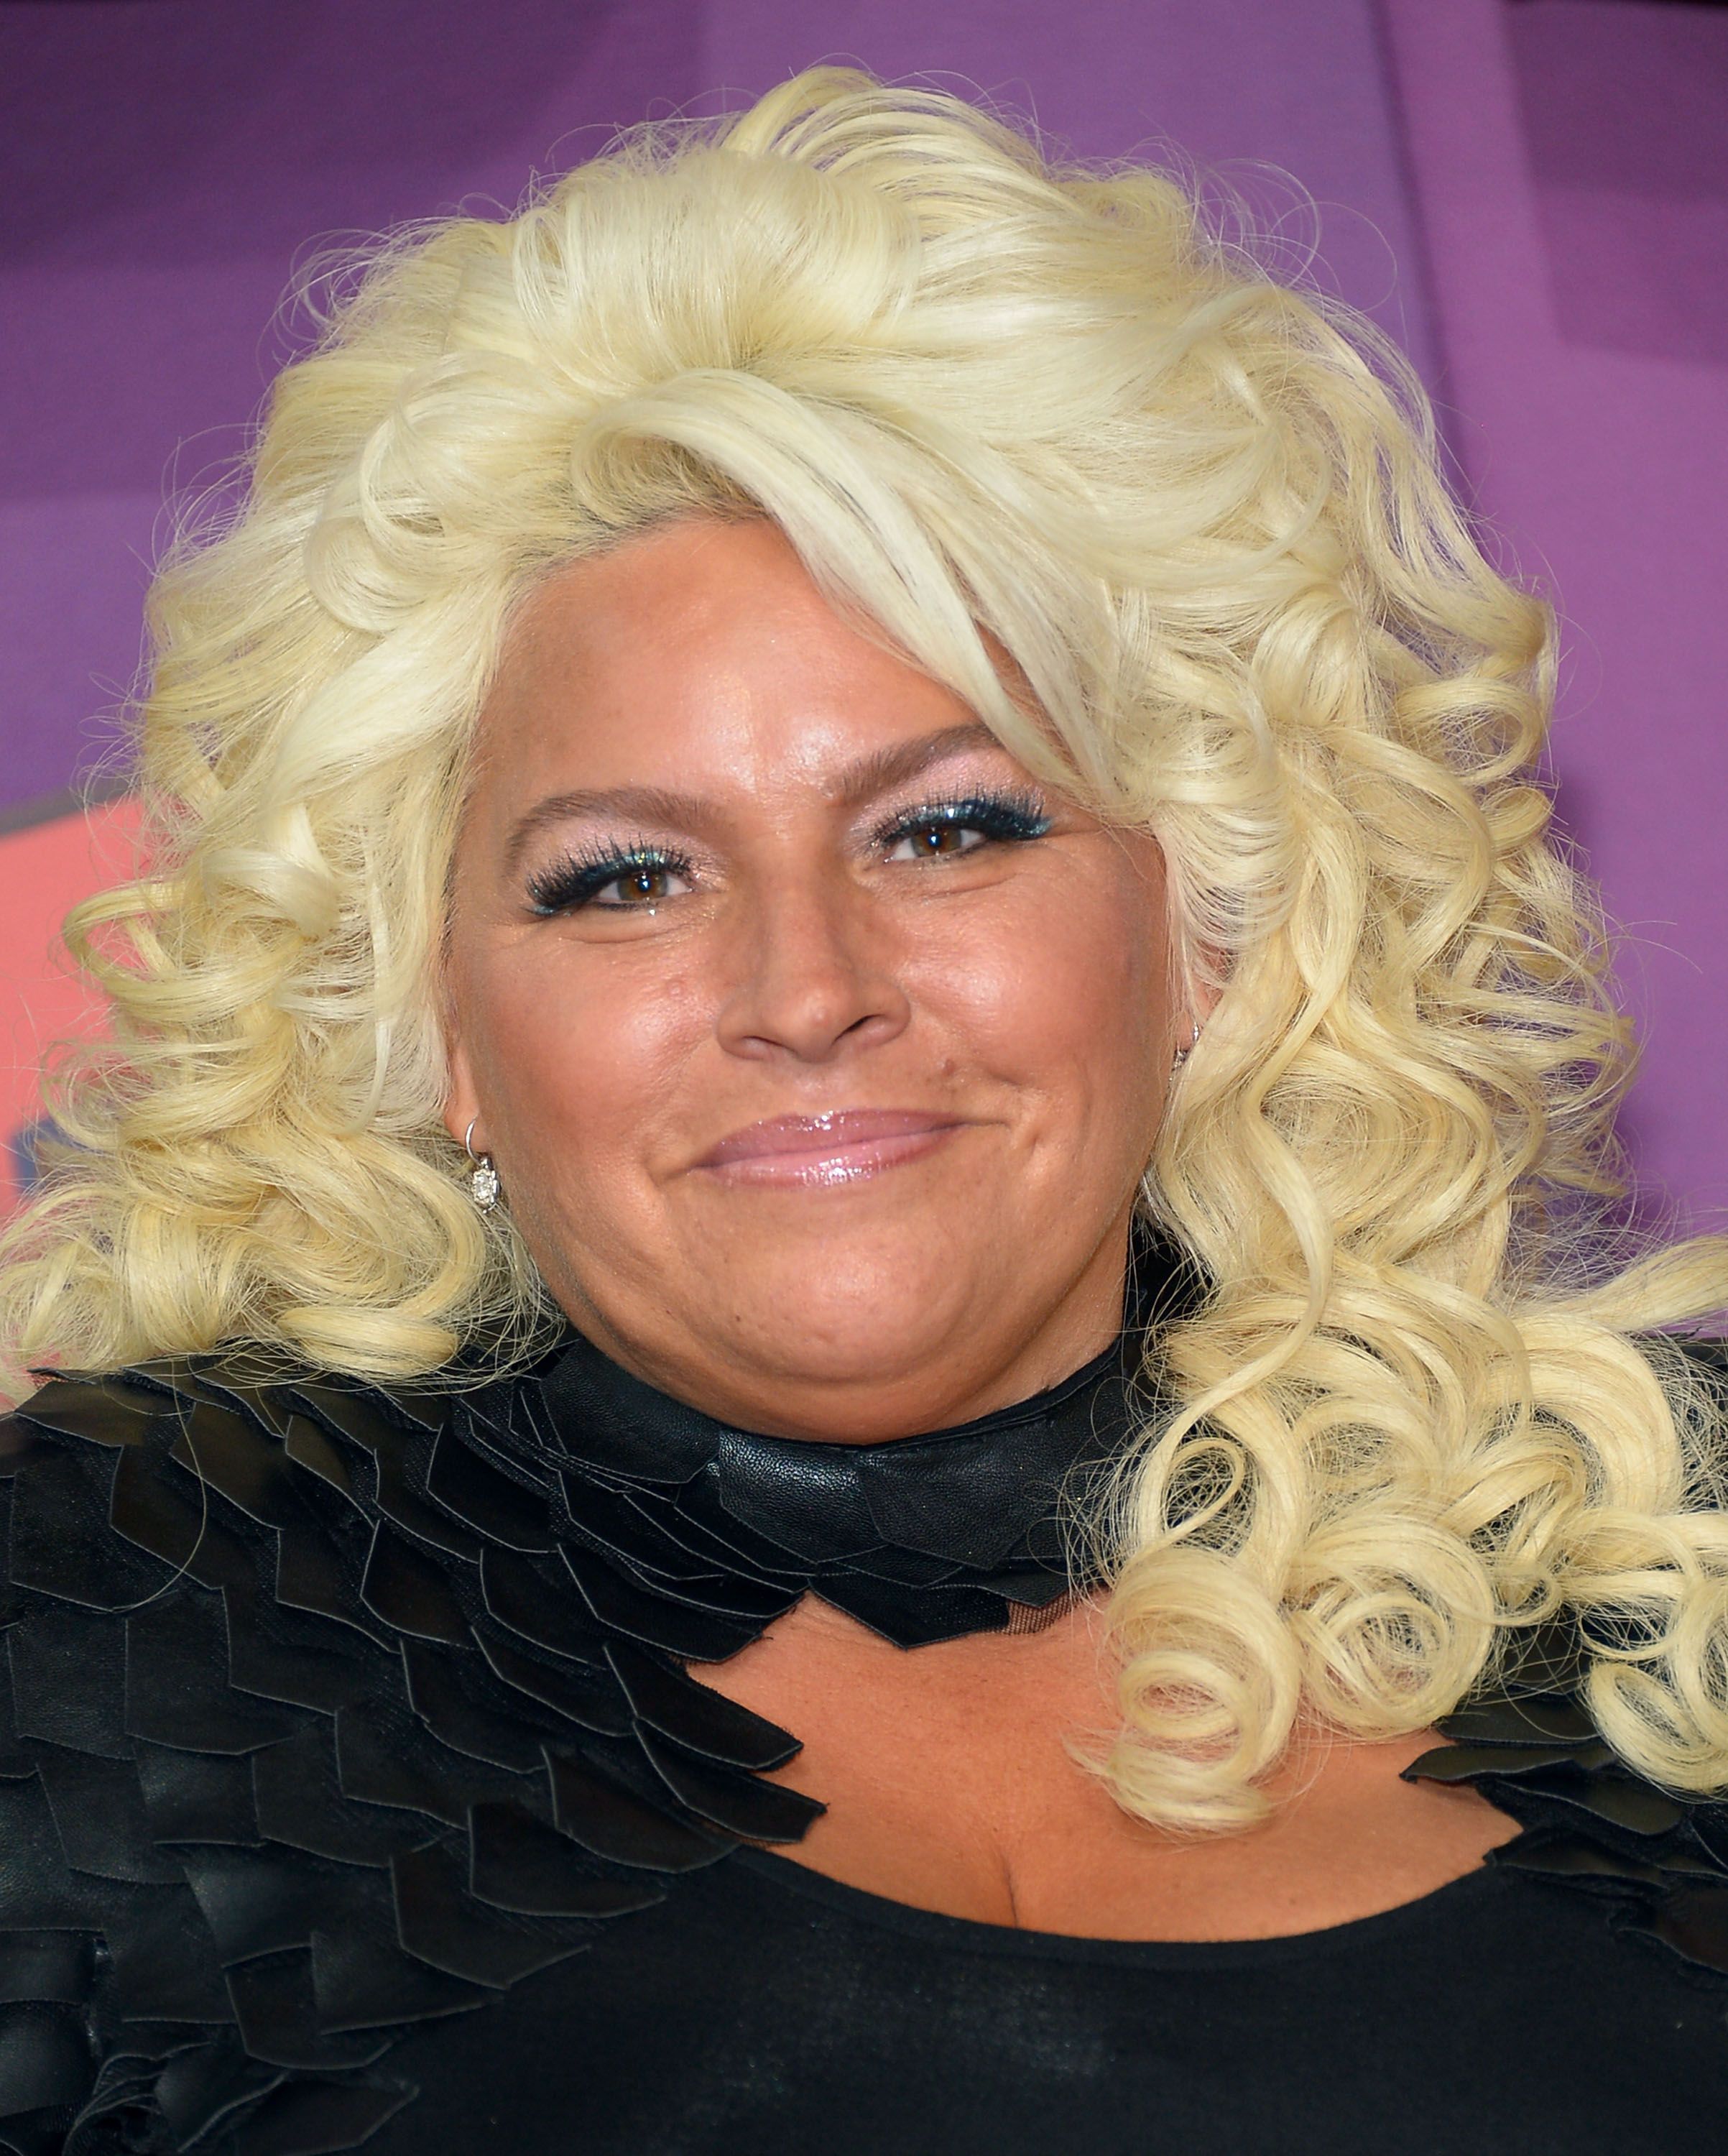 Beth Chapman at the 2014 CMT Music awards at the Bridgestone Arena on June 4, 2014 in Nashville, Tennessee. | Photo: Getty Images